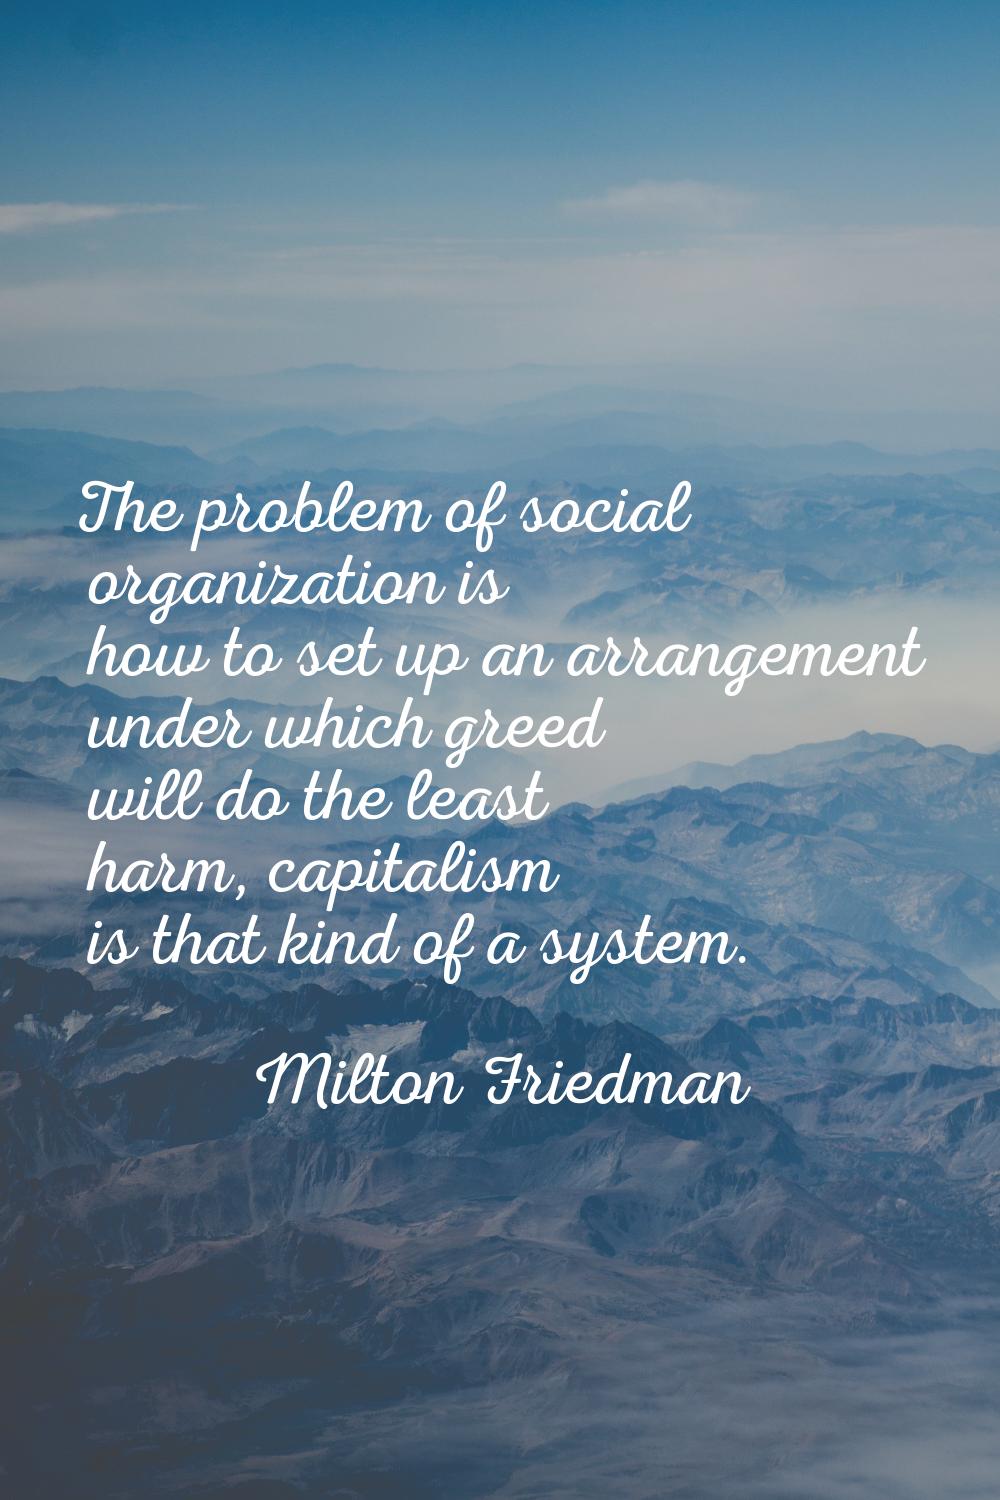 The problem of social organization is how to set up an arrangement under which greed will do the le